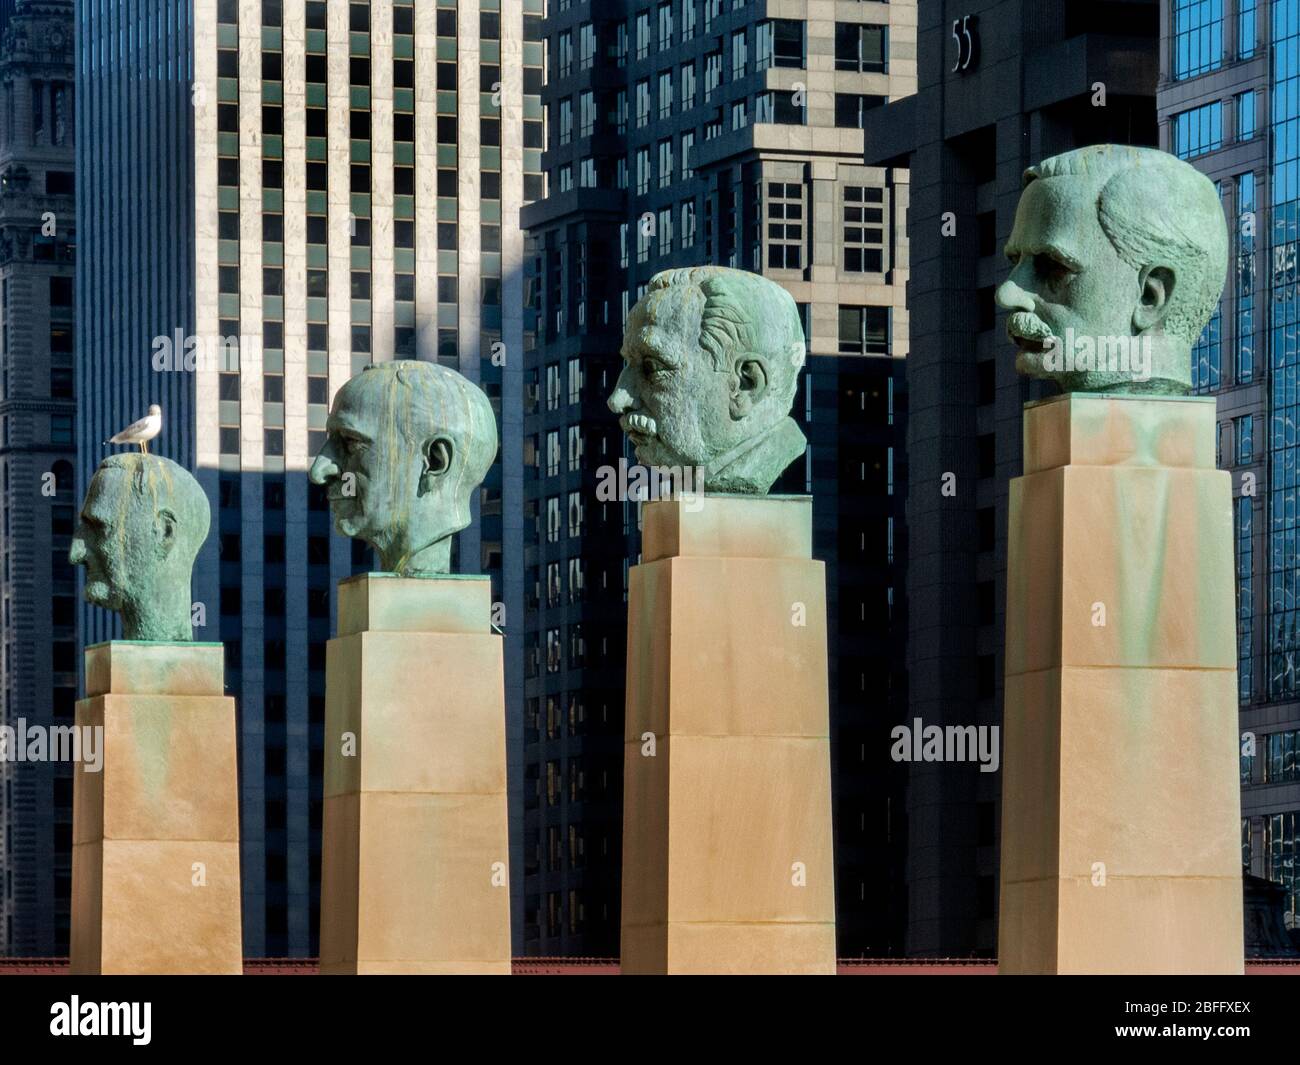 Portrait statues of famous businessmen Robert Wood, Julius Rosenwald, Frank Winfield Woolworth and Marshall Field stand on columns before Chicago's Merchandise Mart on the Chicago River. Stock Photo